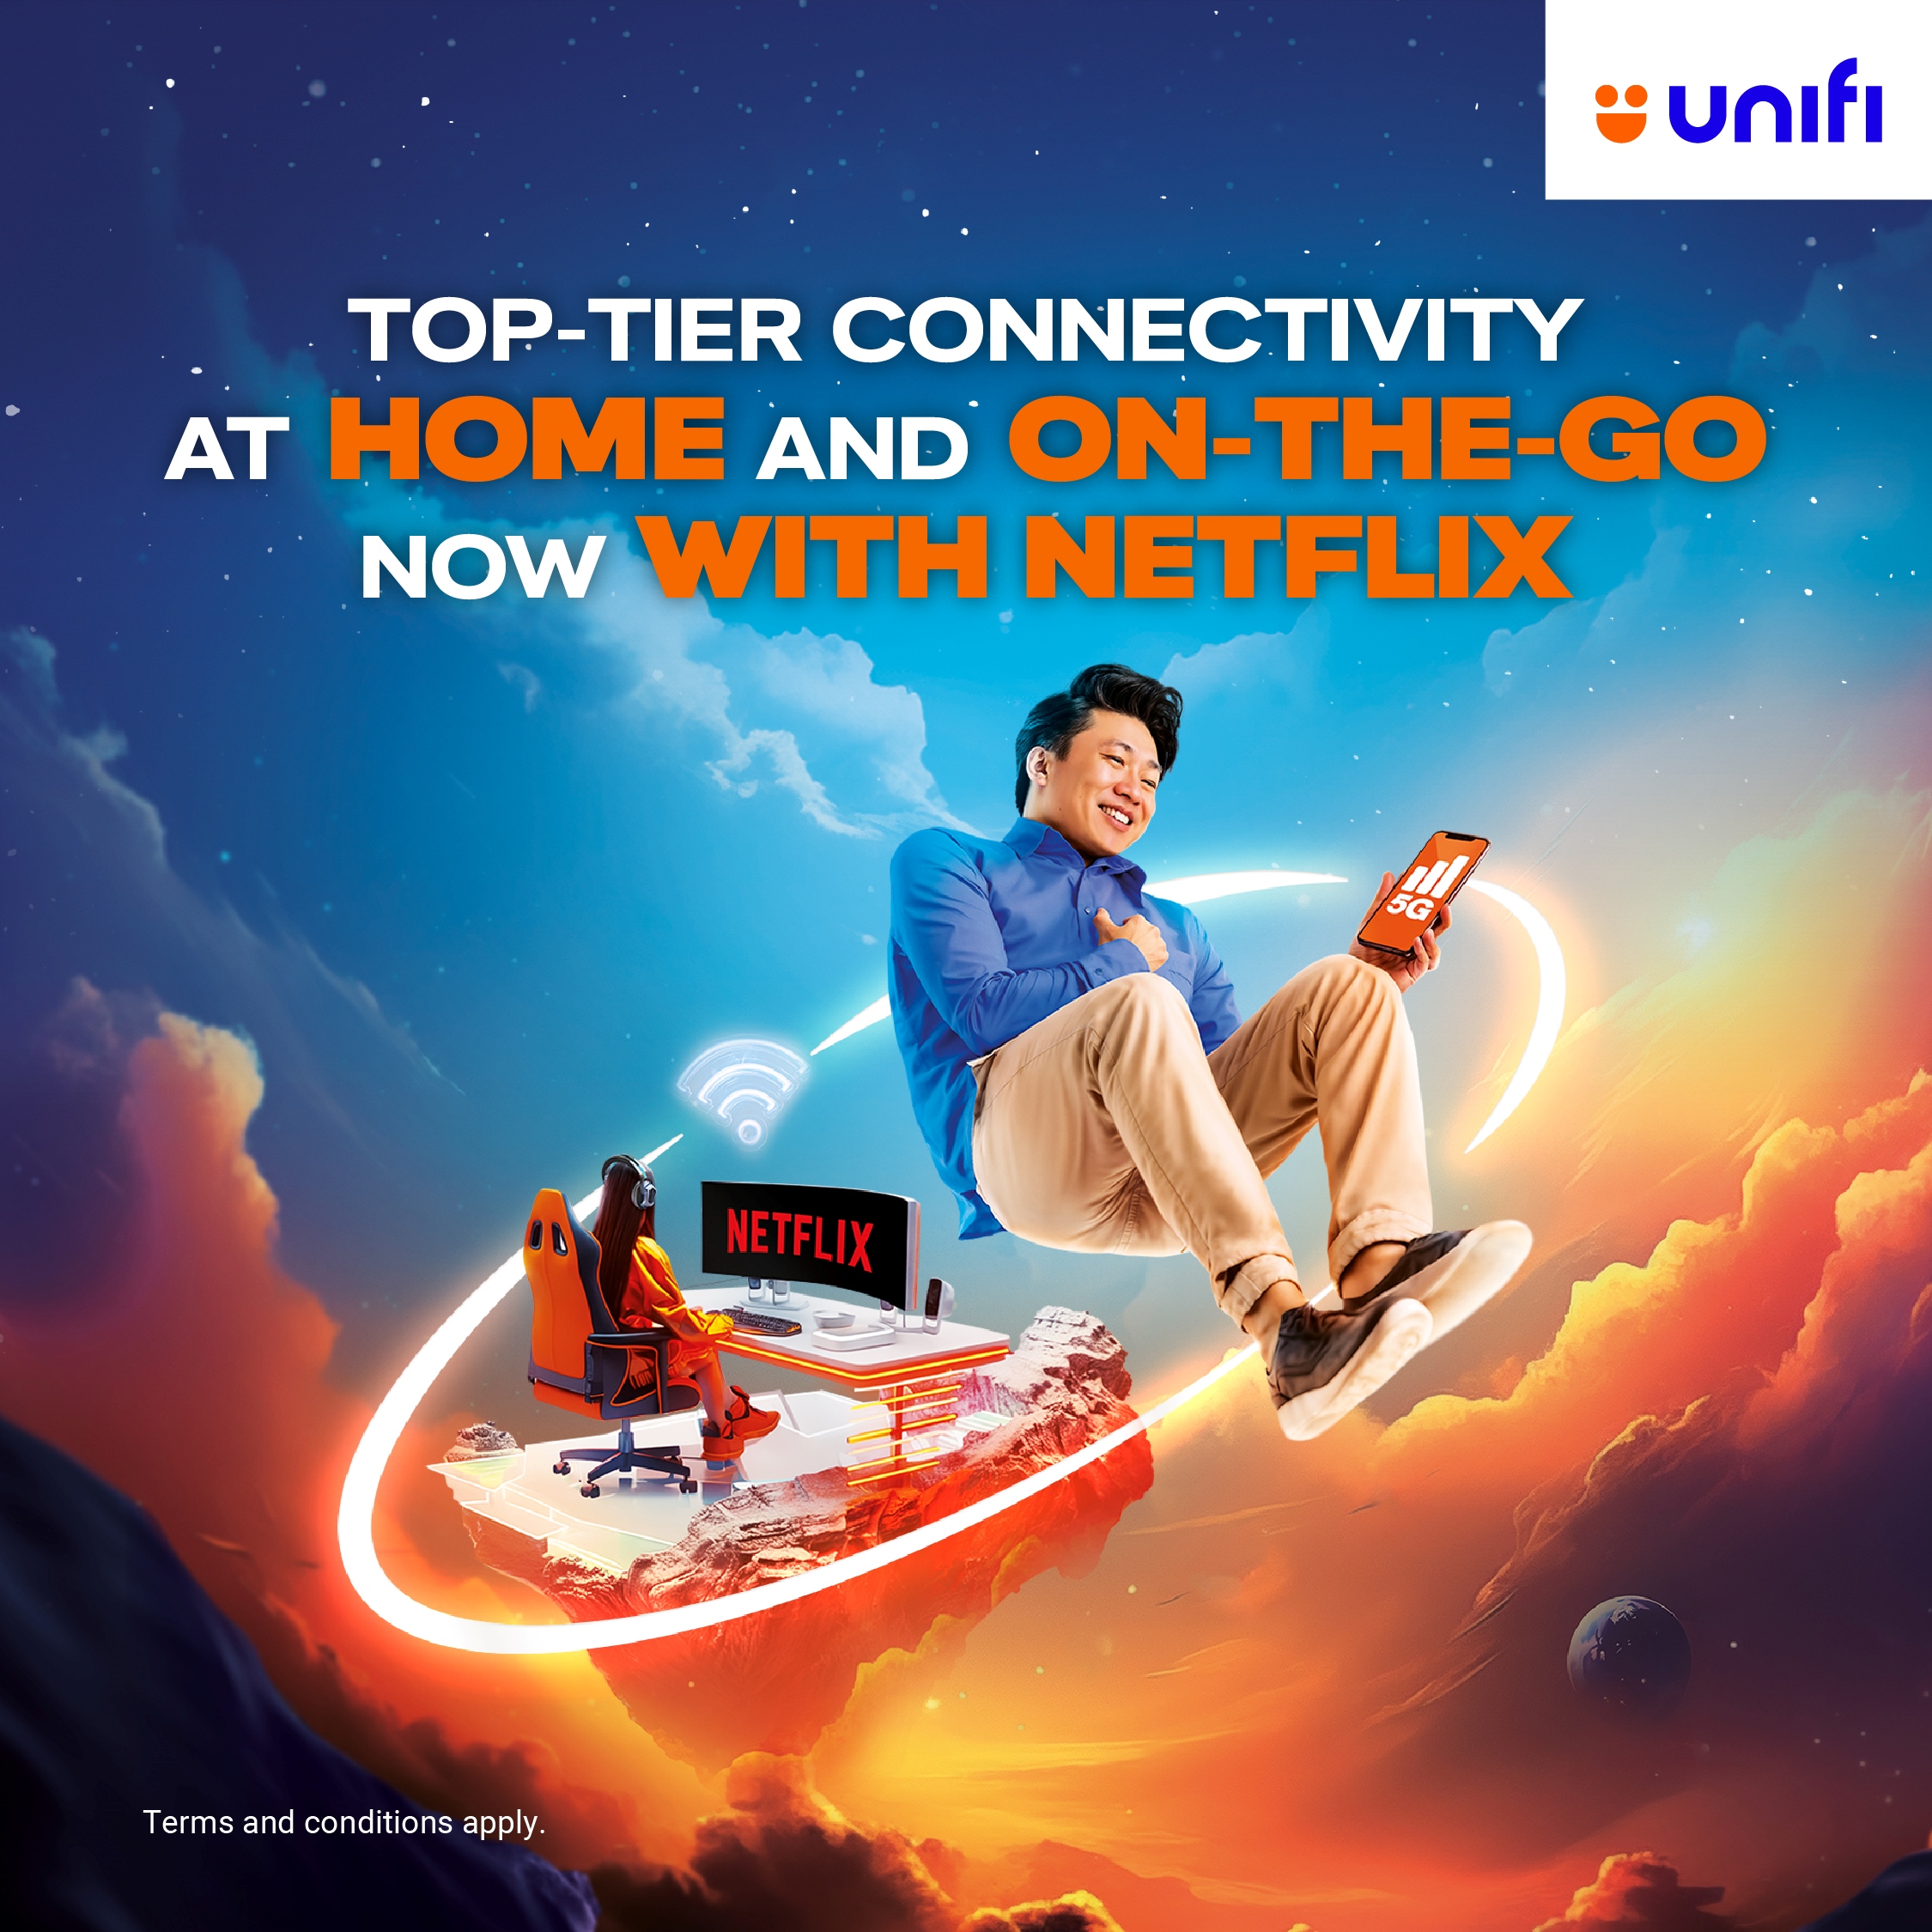 Unifi Launches UniVerse, Presenting Its Best Convergence Offerings for Today’s Digital Customers